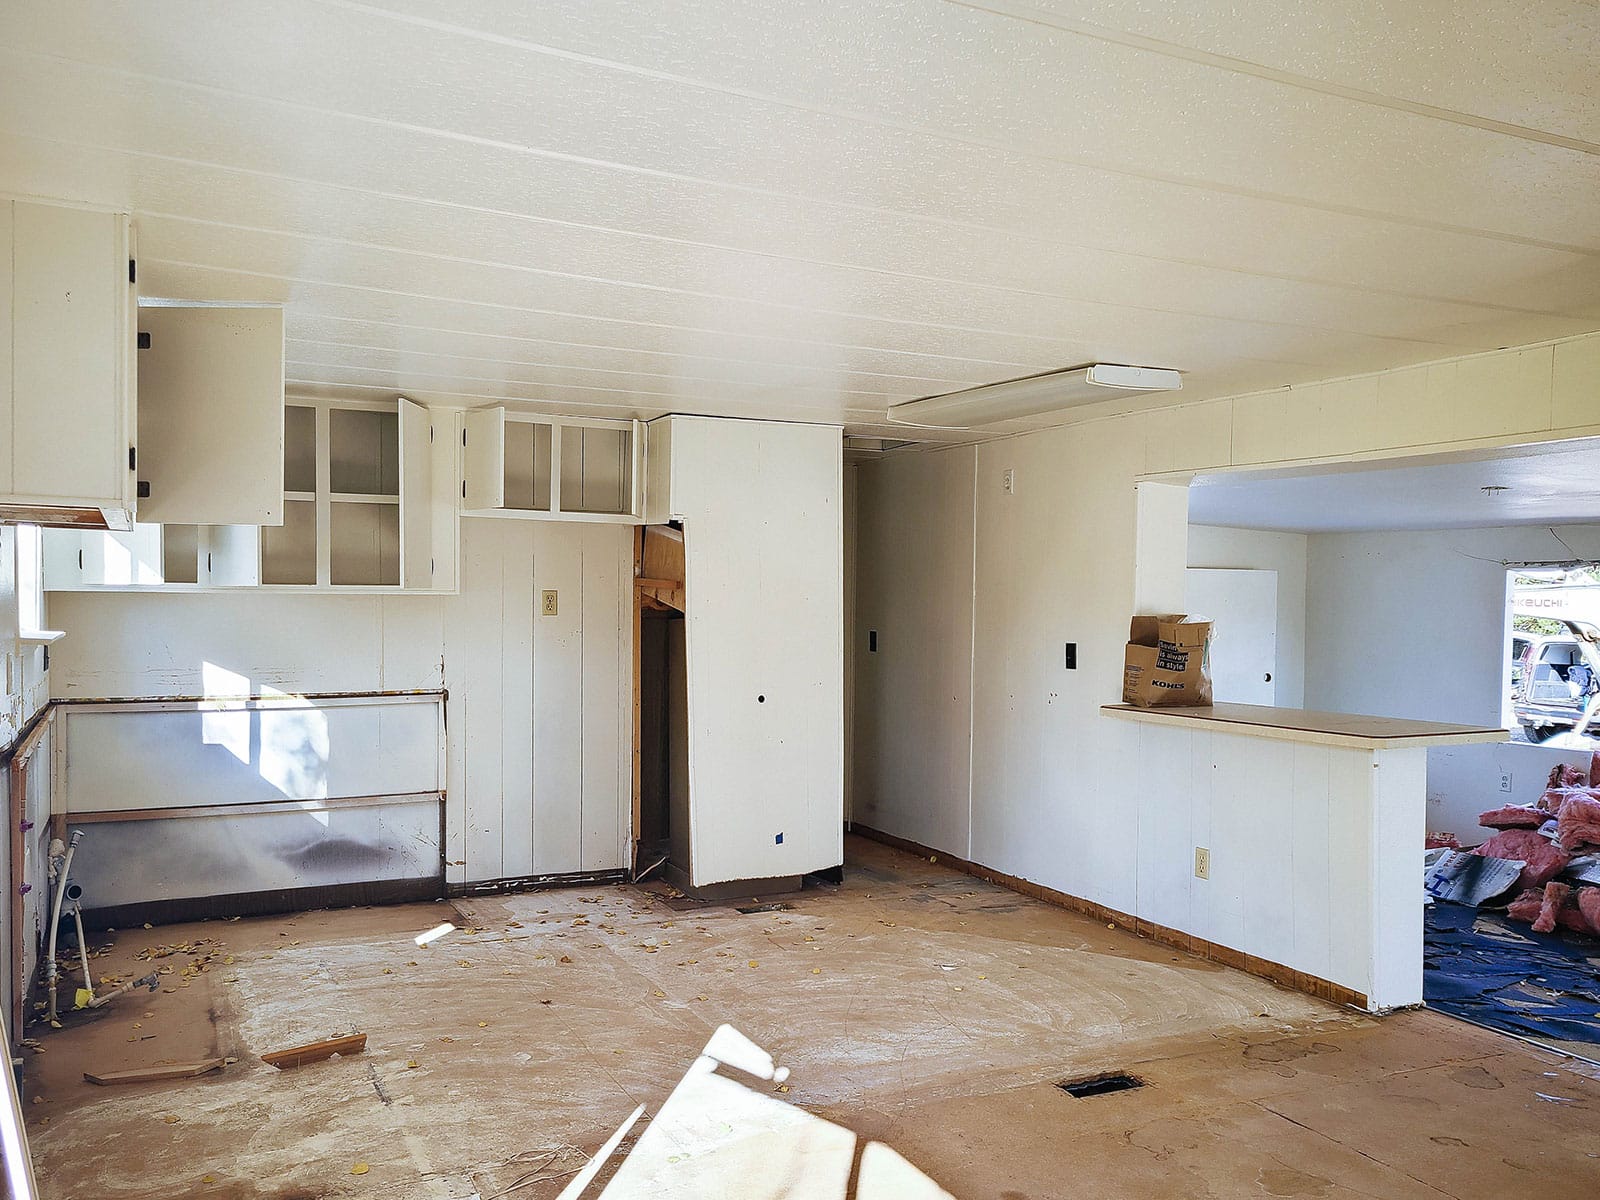 A gutted kitchen with no floors, white walls, and partially torn out cabinets